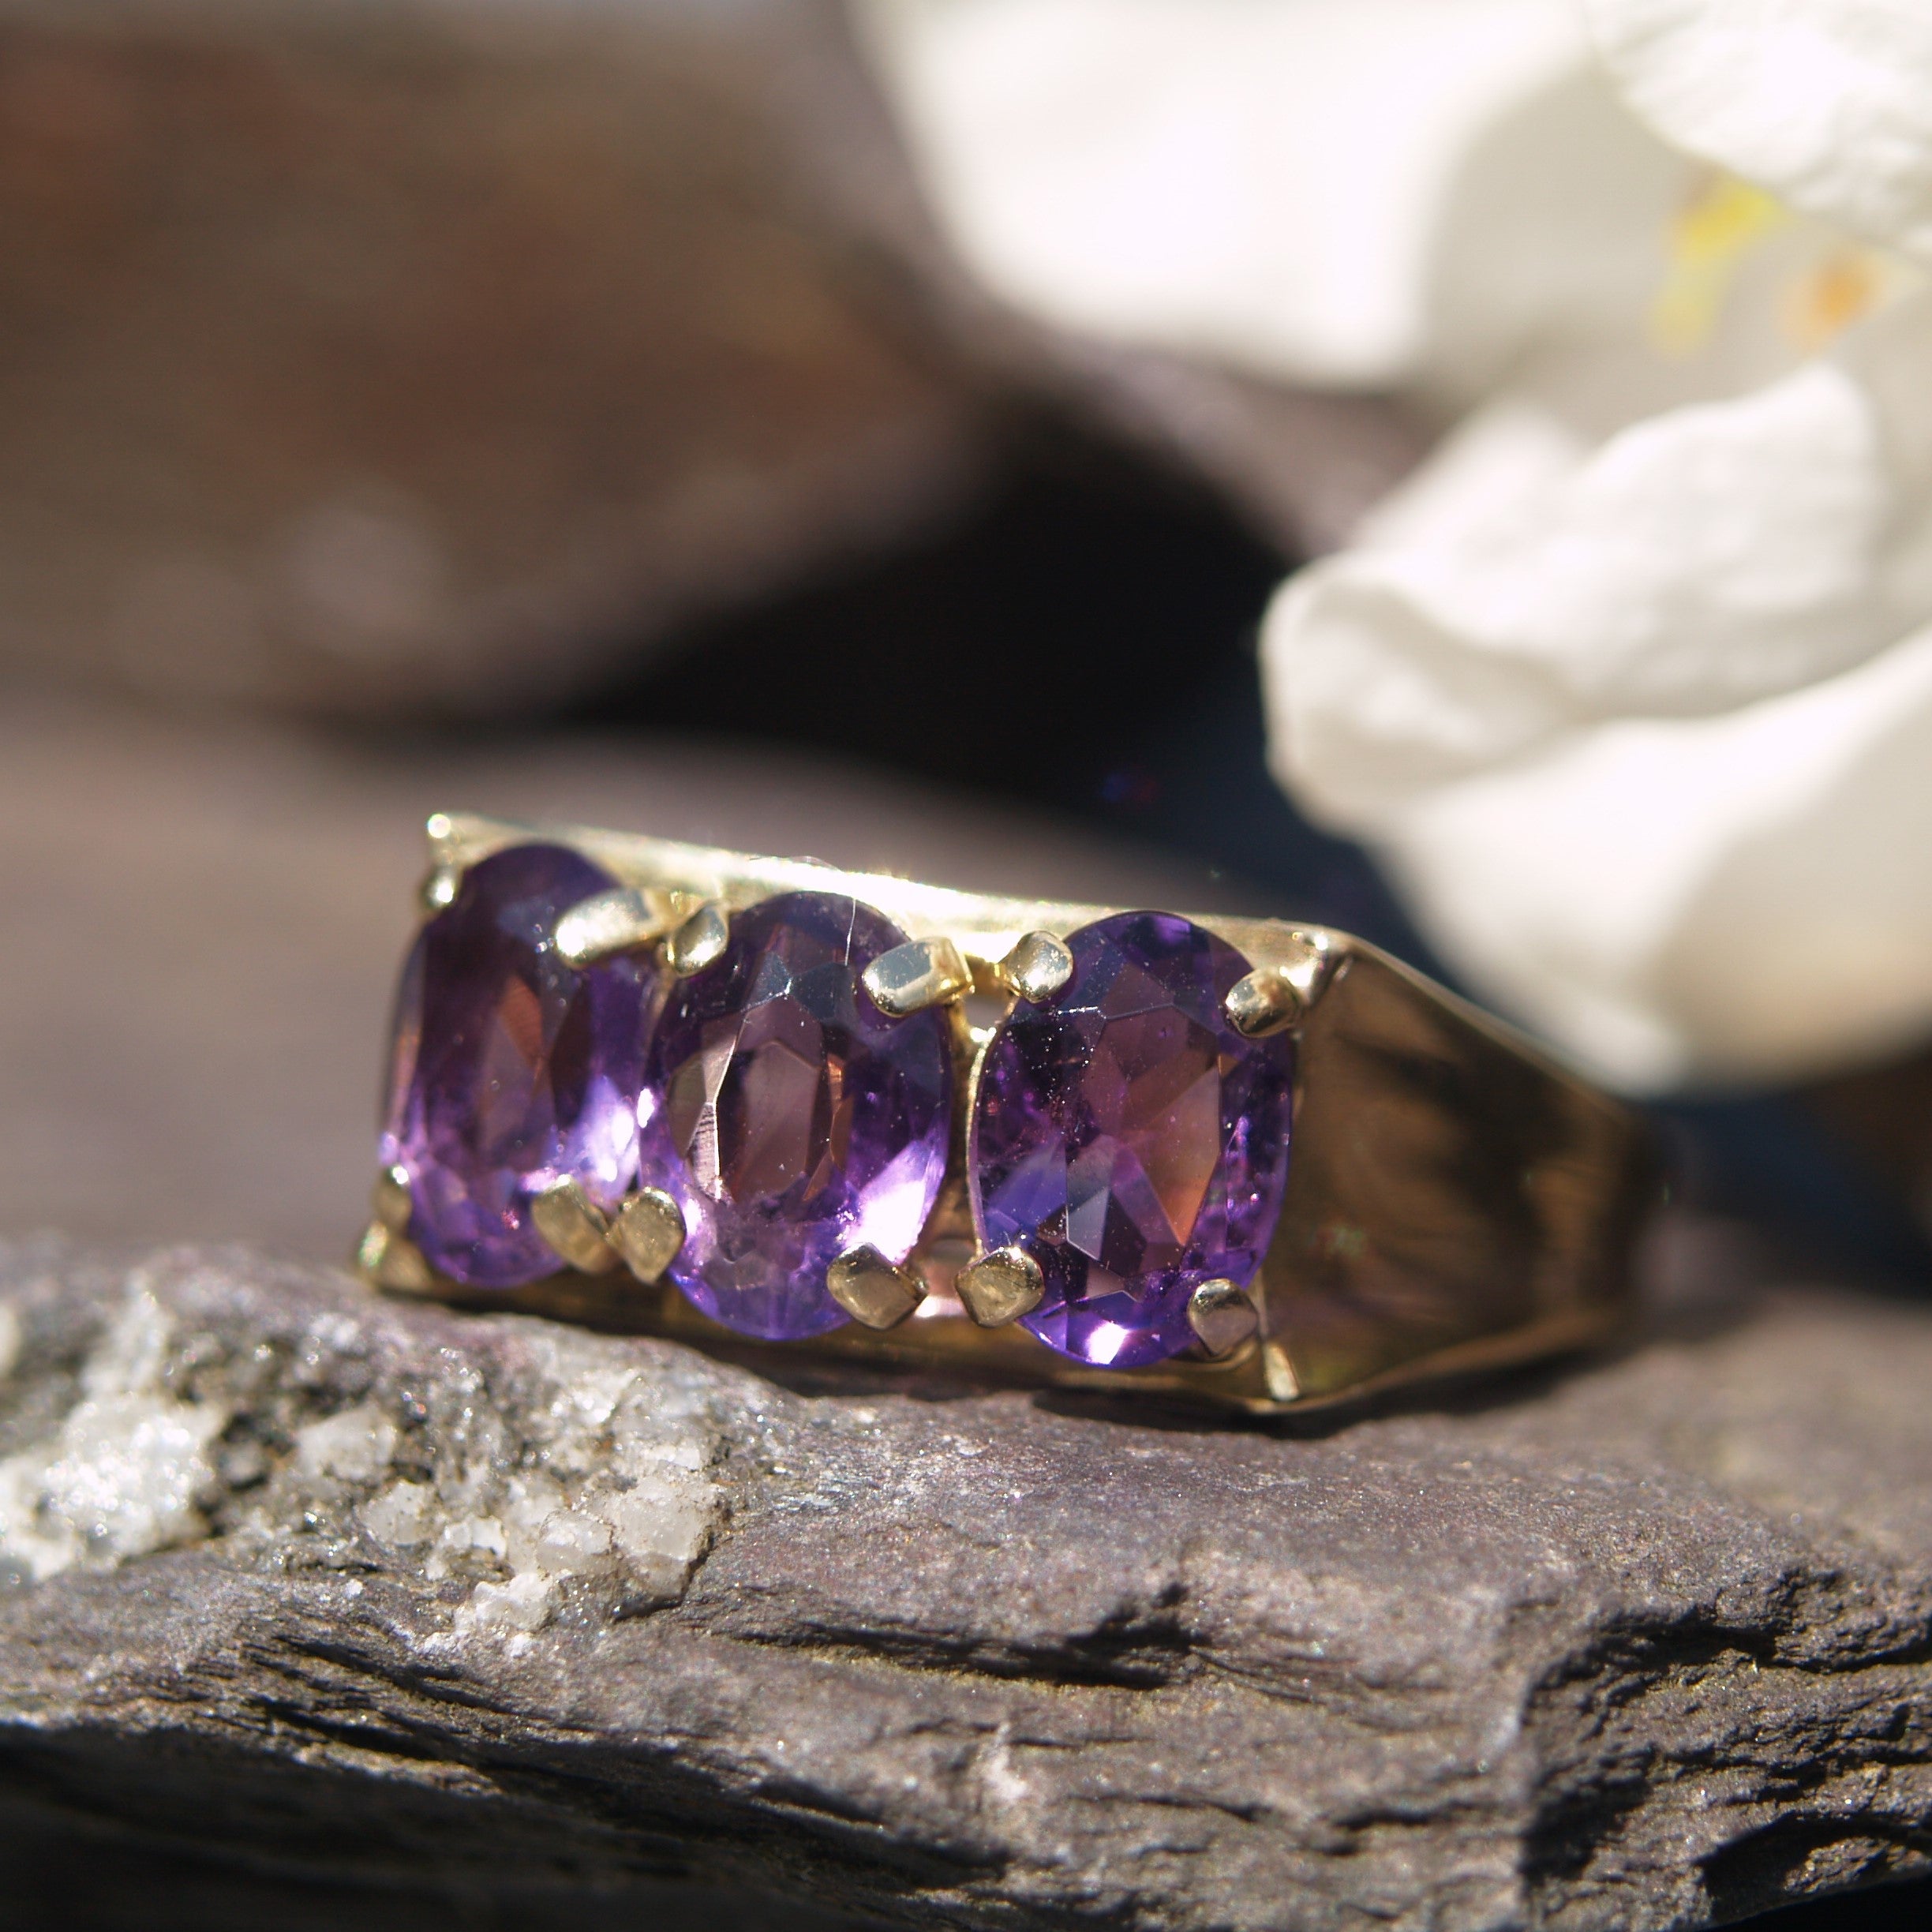 9ct Gold Amethyst Trilogy Ring Size O or 7 1/4 US.